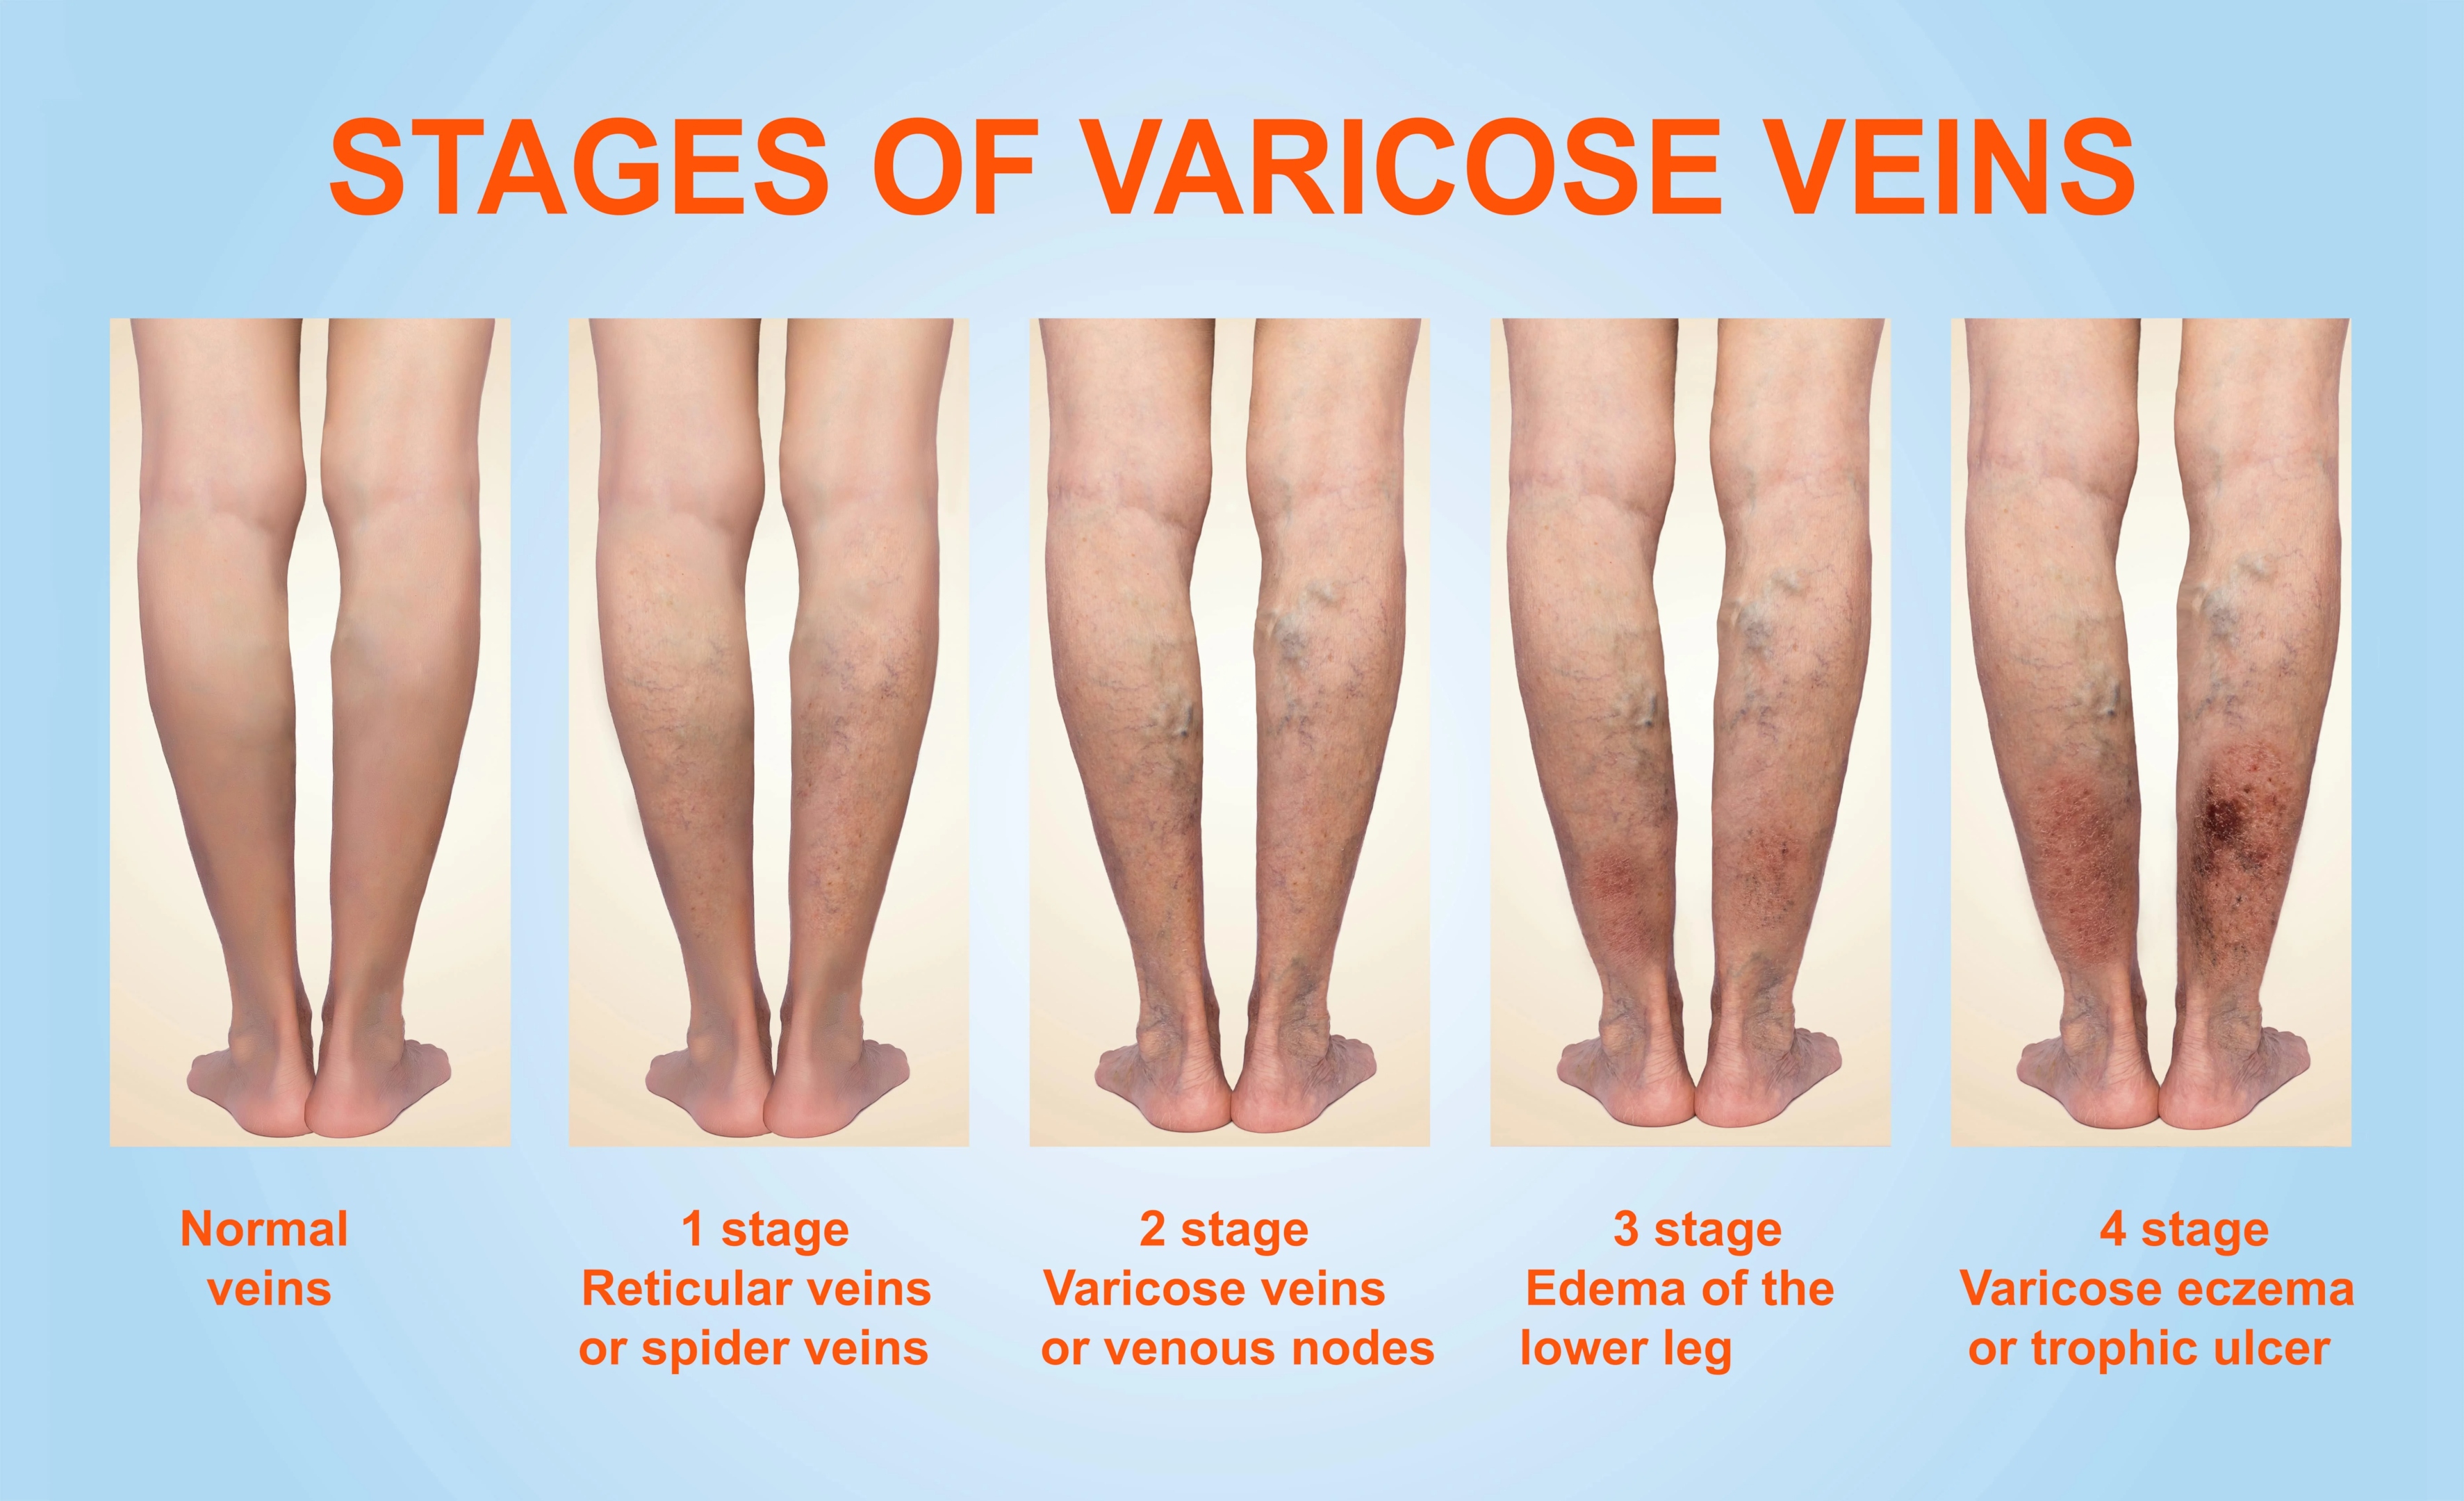 stages of varicose veins on the legs of a patient